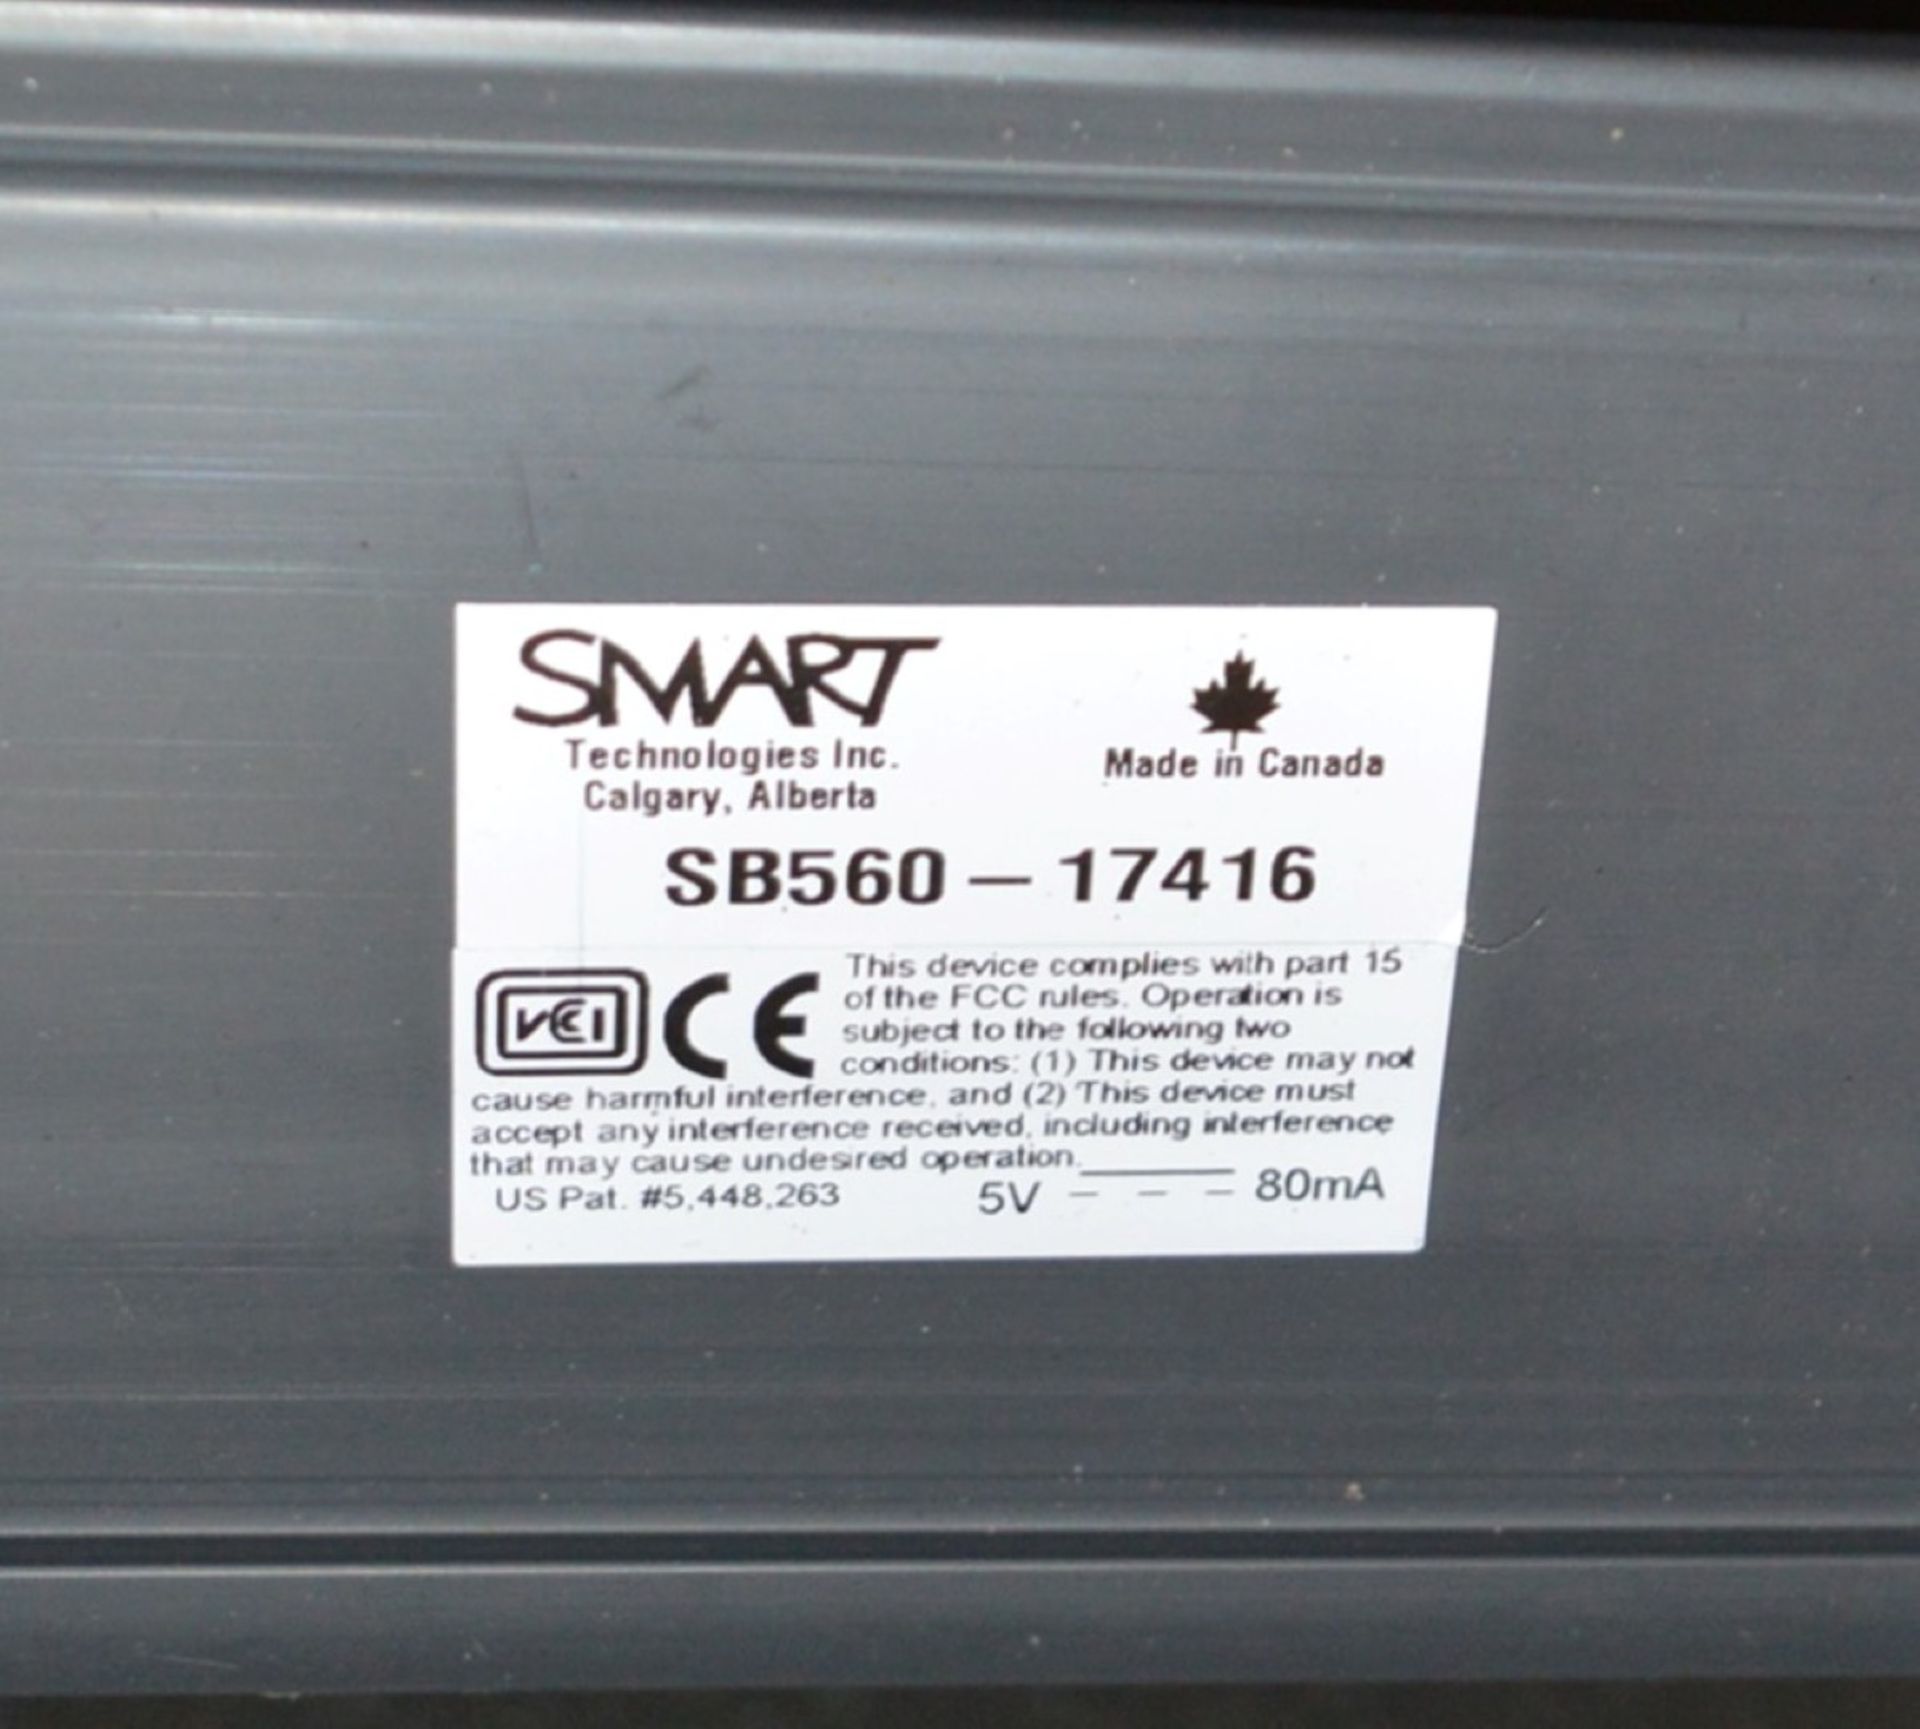 1 x Smart SB560 Interactive Whiteboard - 60 Inch Size - CL089 - With Protection Case - Very Good Con - Image 3 of 5